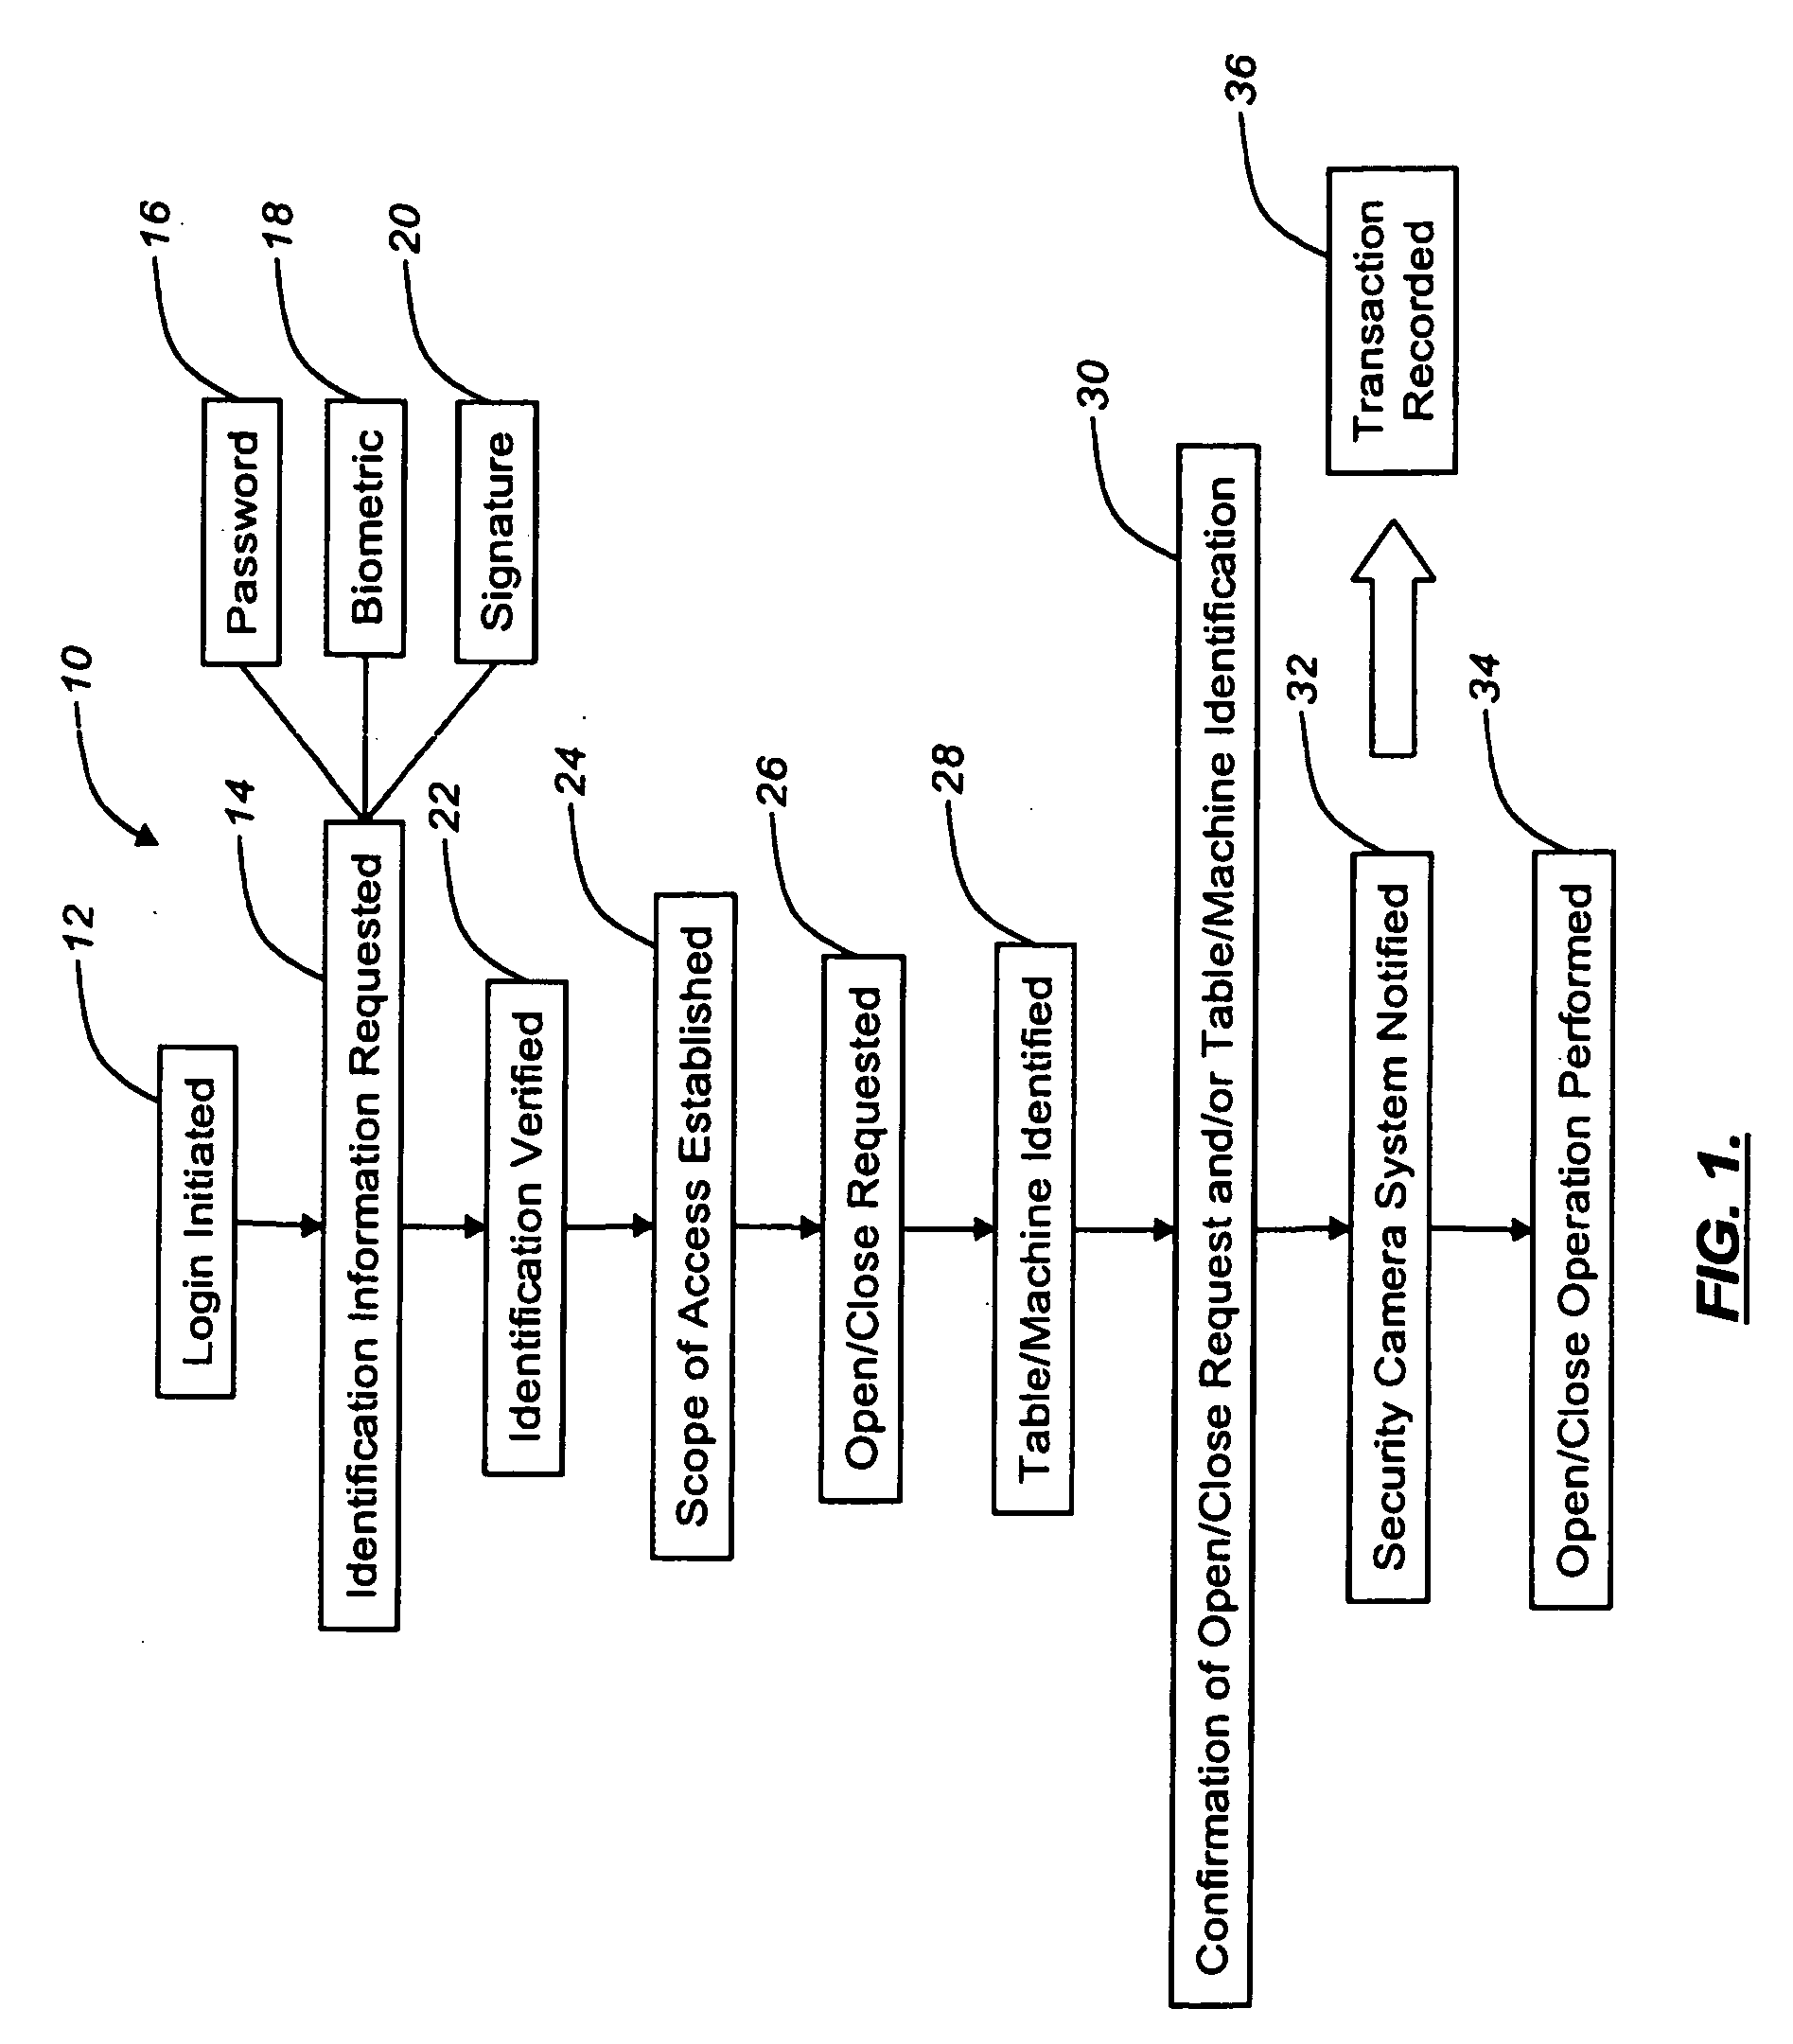 Gaming security system and associated methods for selectively granting access